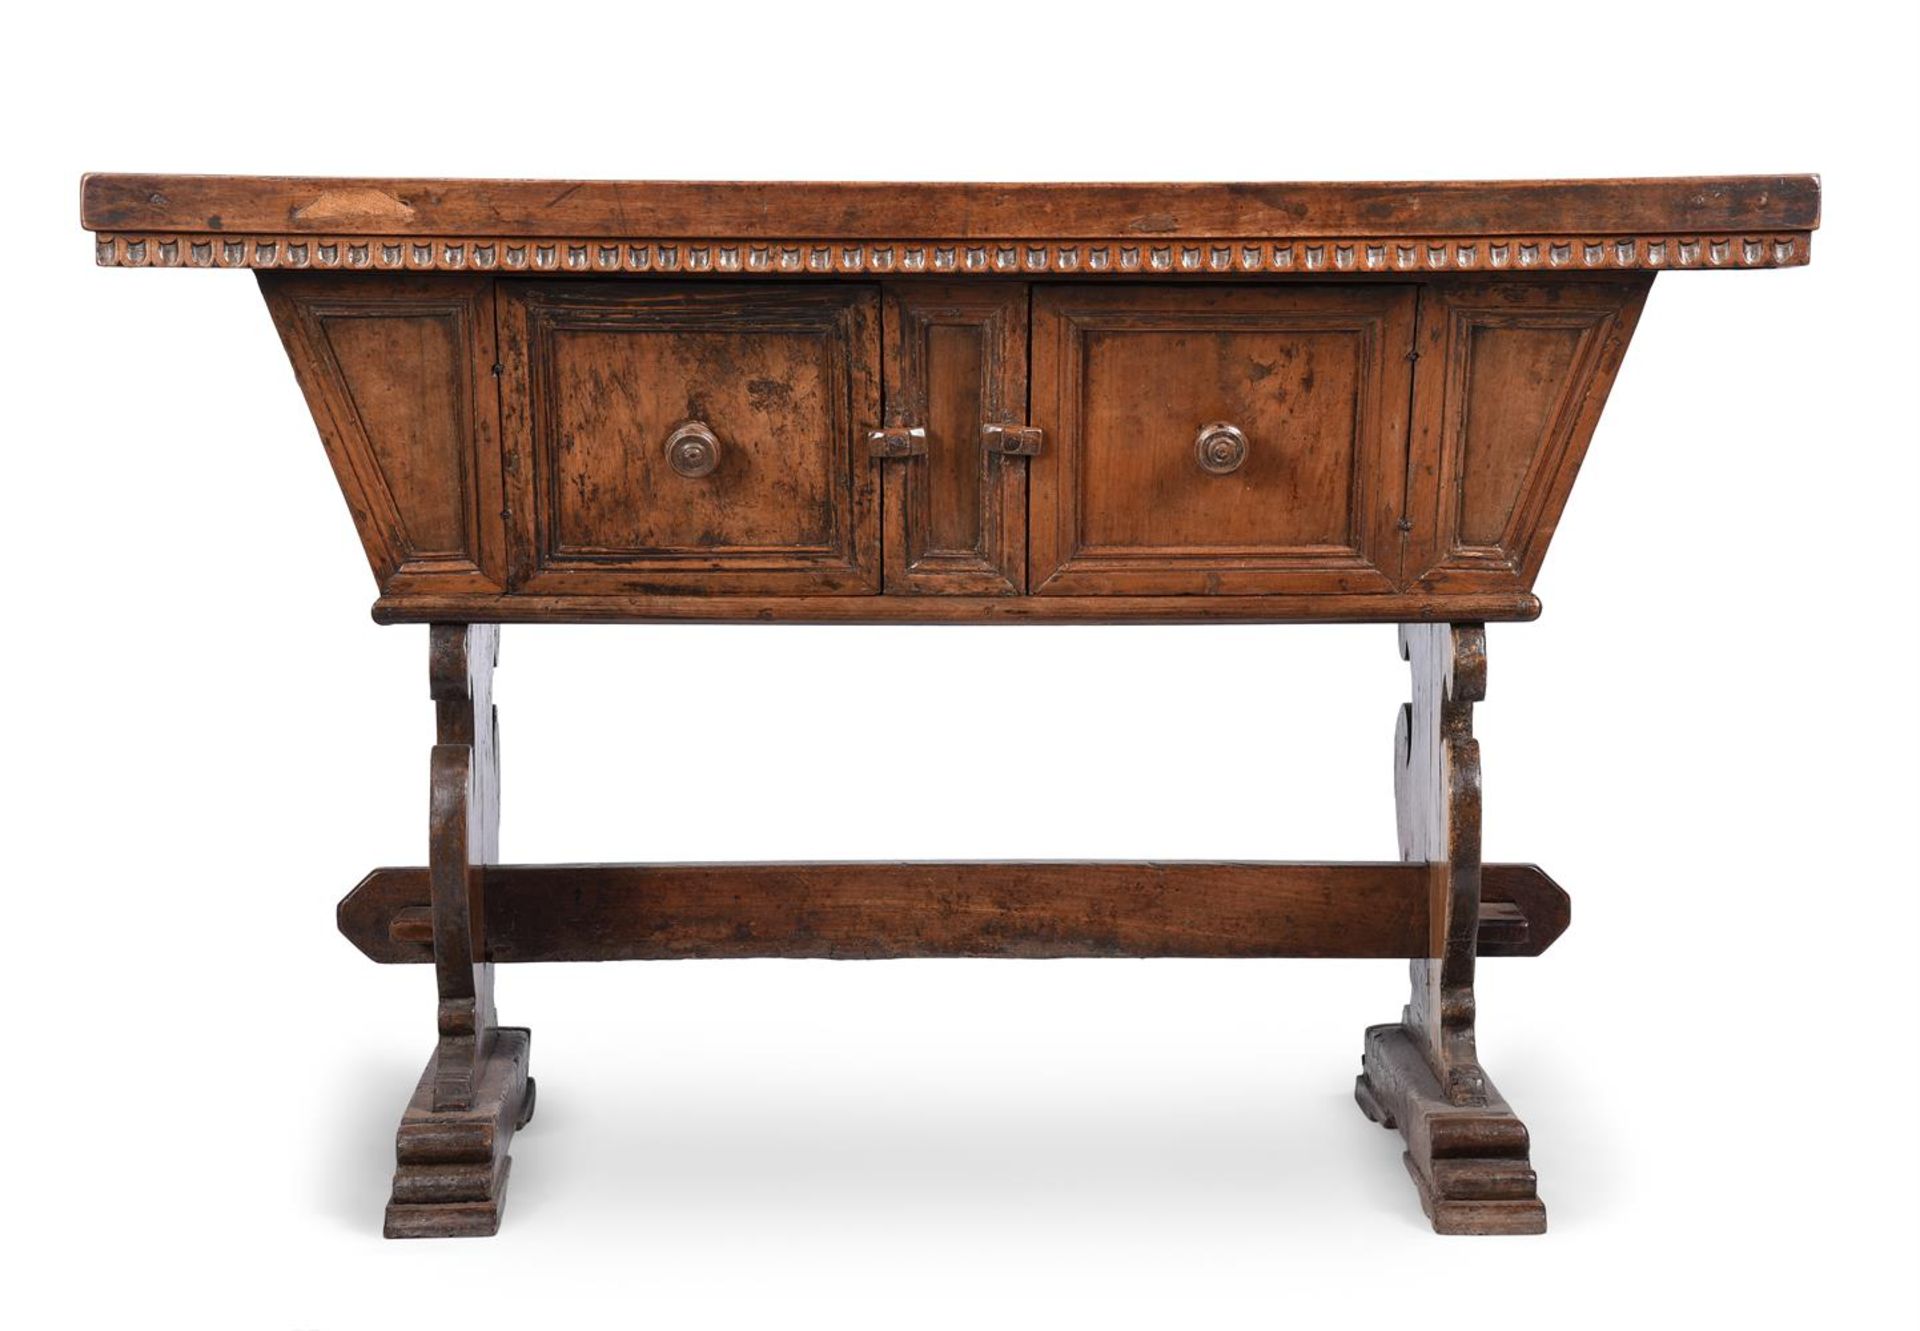 AN ITALIAN WALNUT RENT TABLE OR SIDE TABLE, 16TH/17TH CENTURY - Image 2 of 3